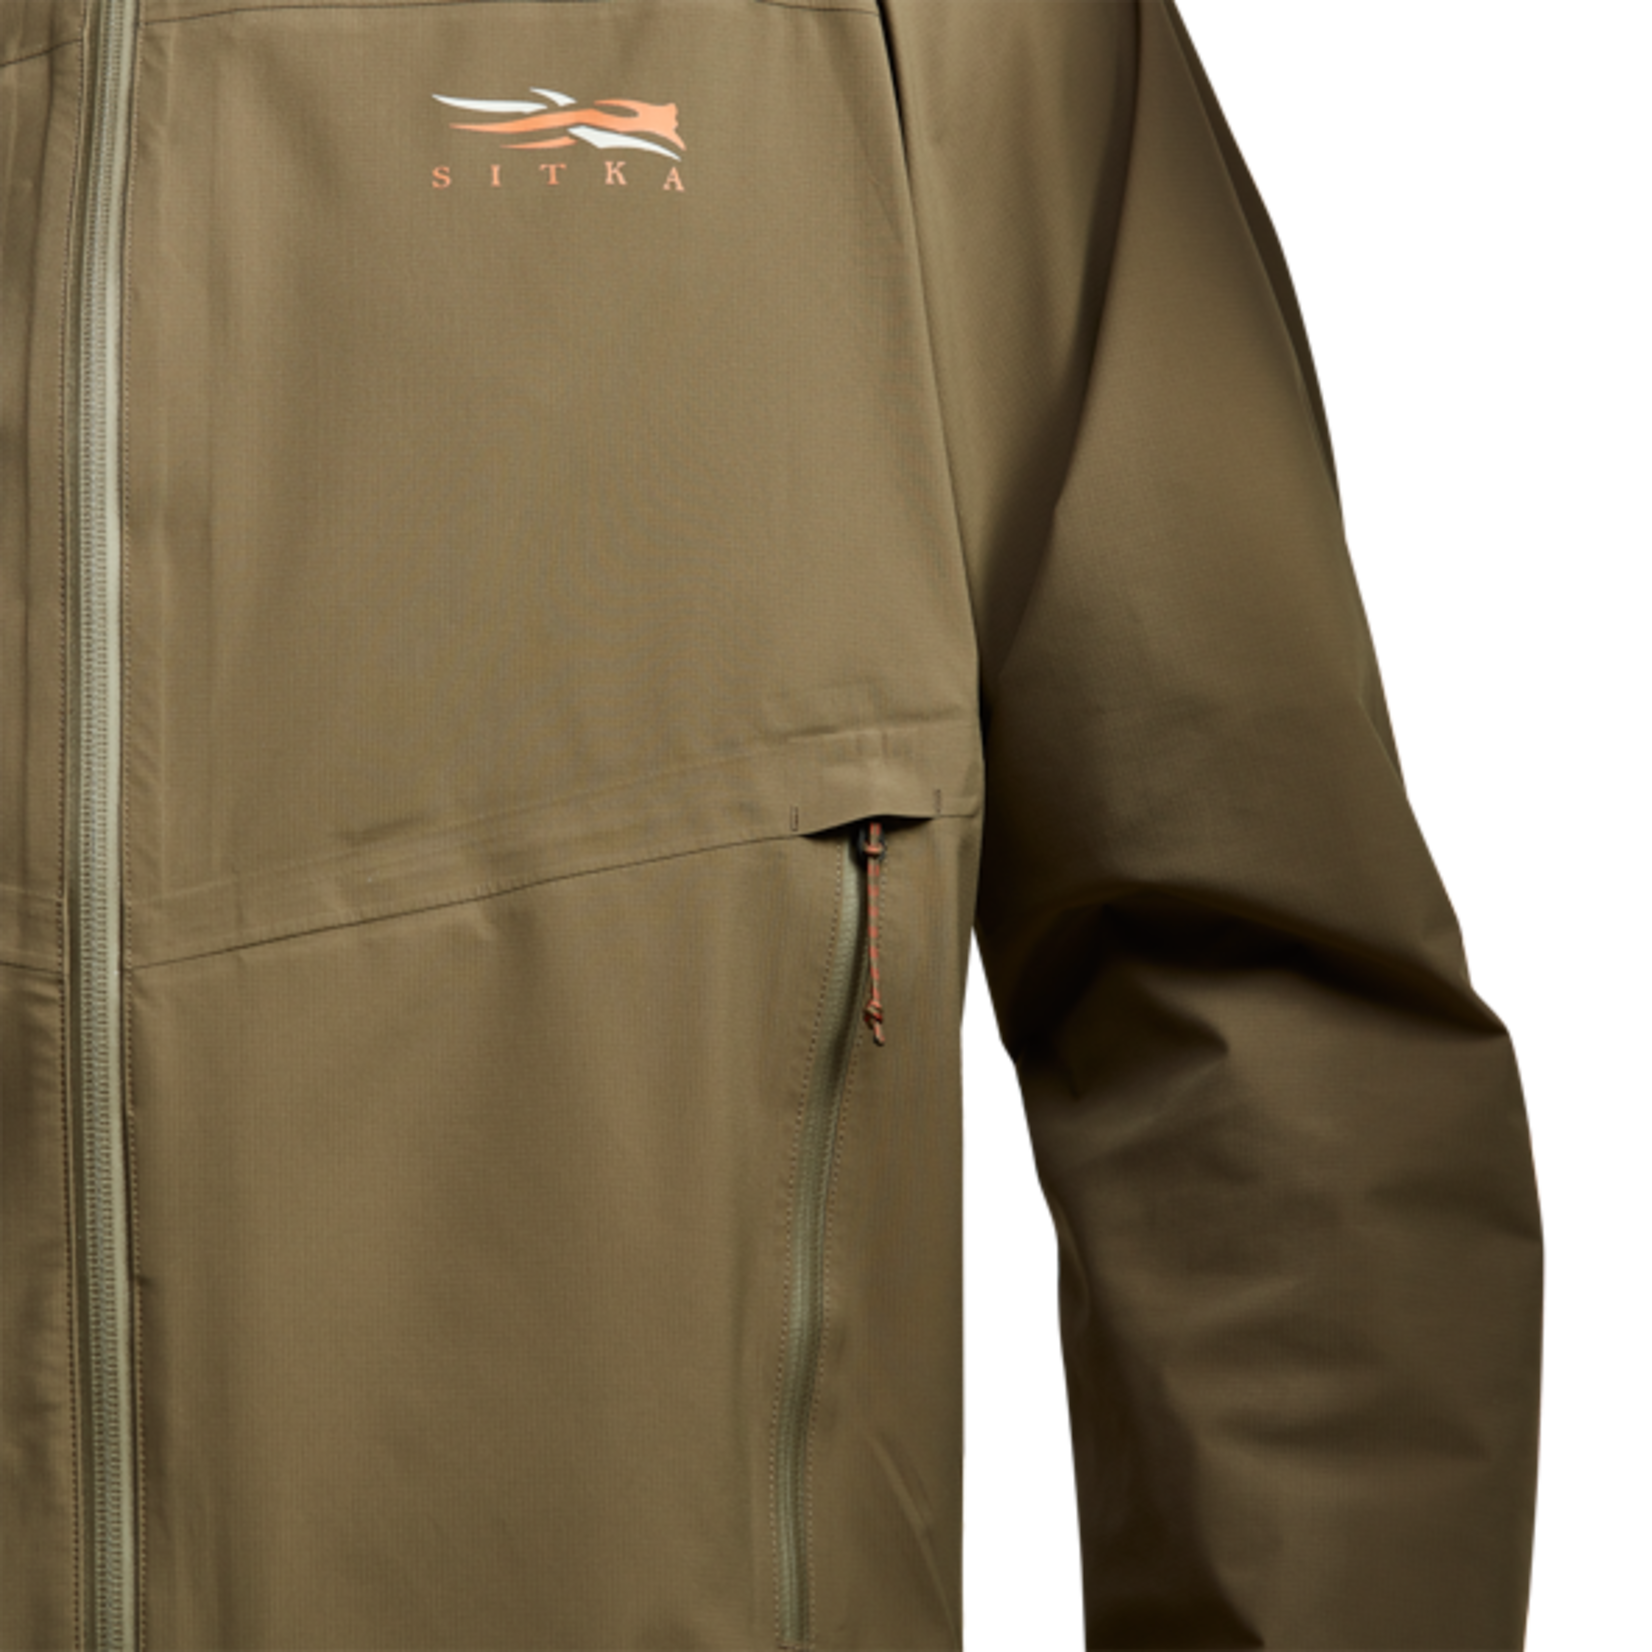 Sitka Dew Point Pyrite Jacket and Pants